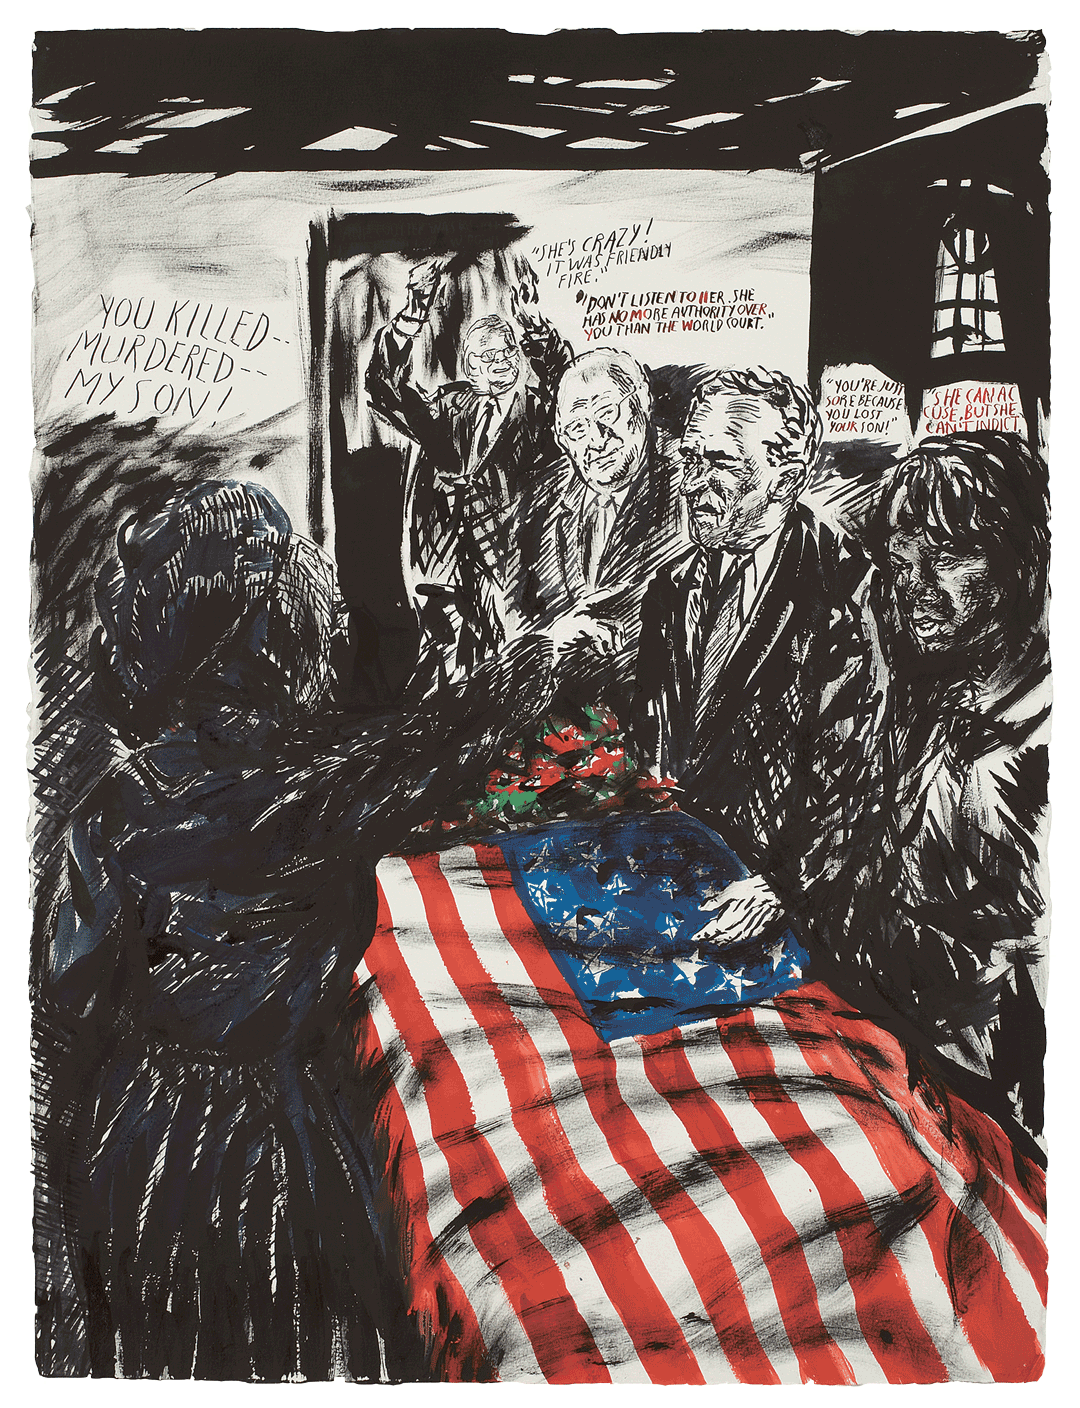 A drawing by Raymond Pettibon titled No Title (You killed--murdered--), dated 2007.